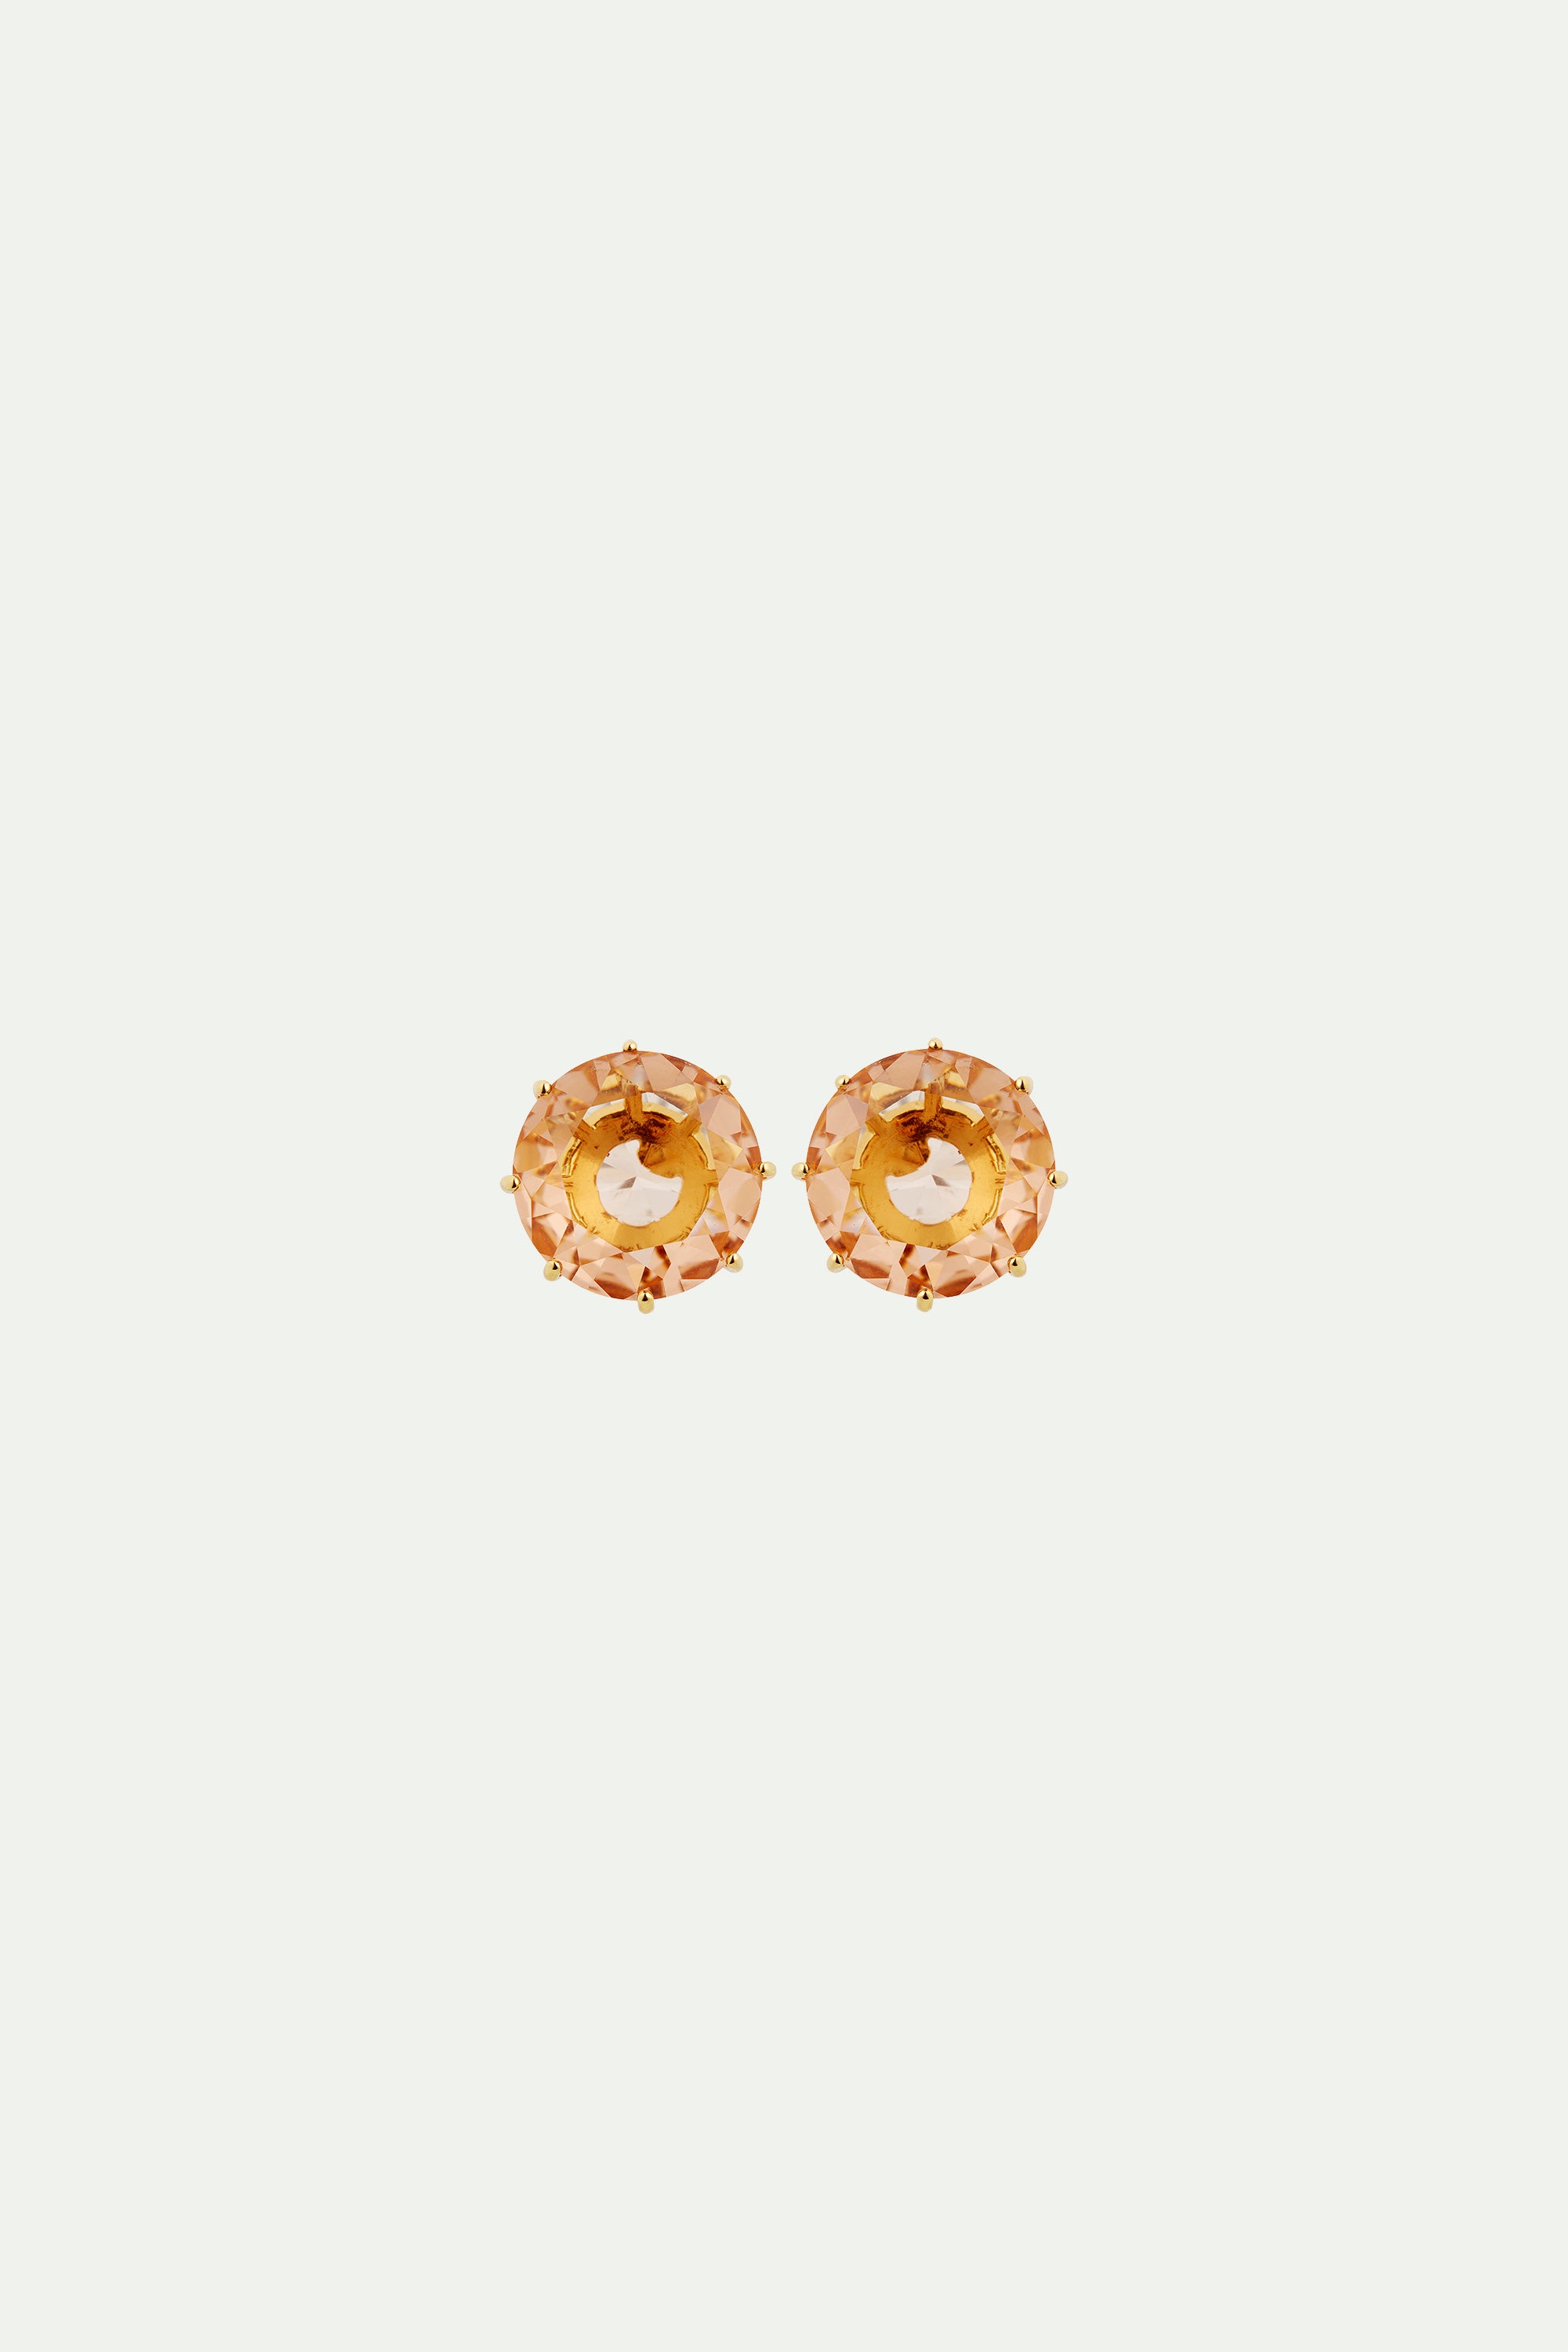 Apricot pink diamantine and round stone post earrings